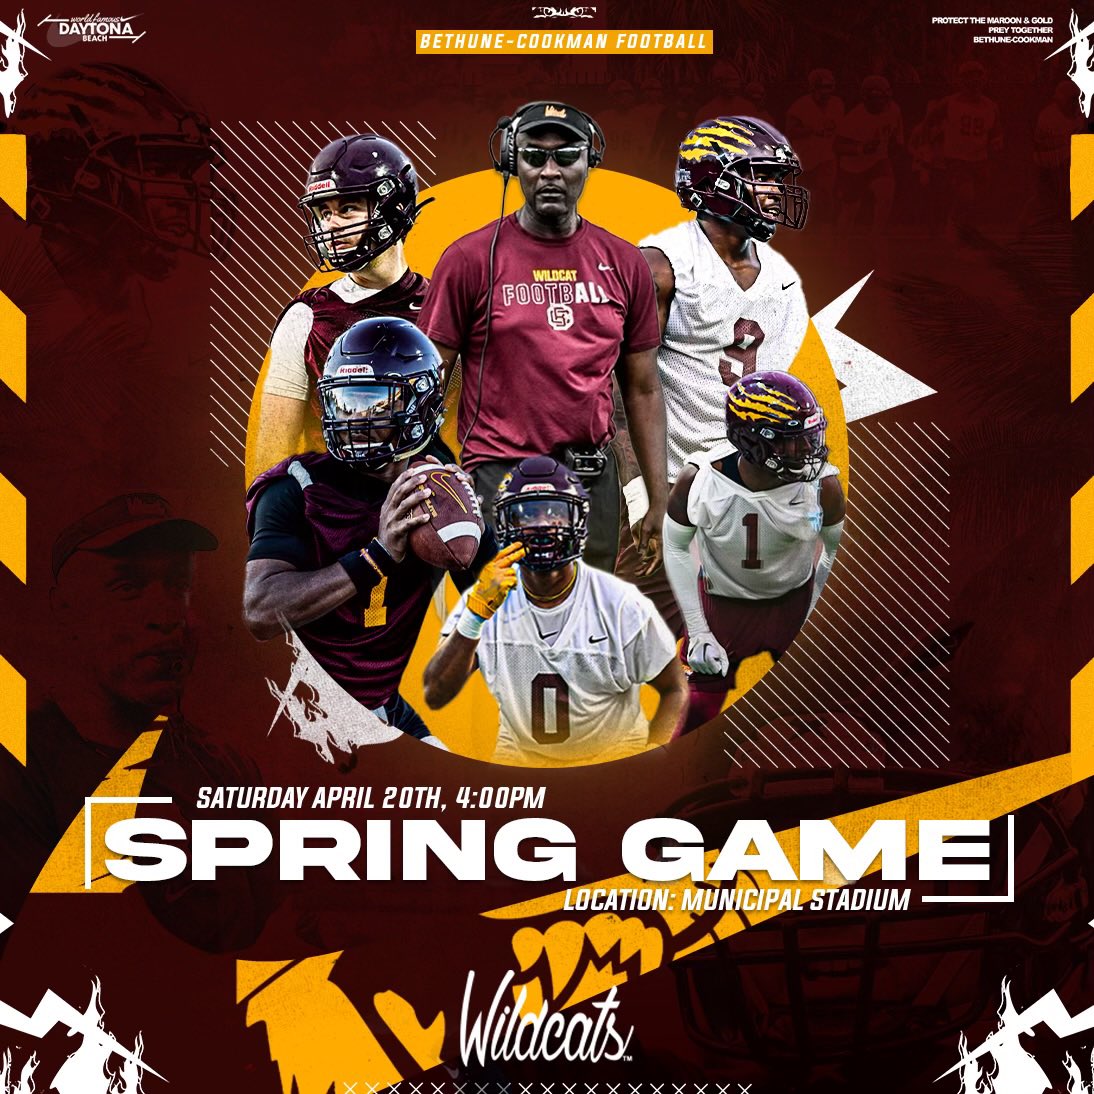 See You There!!! #HailWildcats